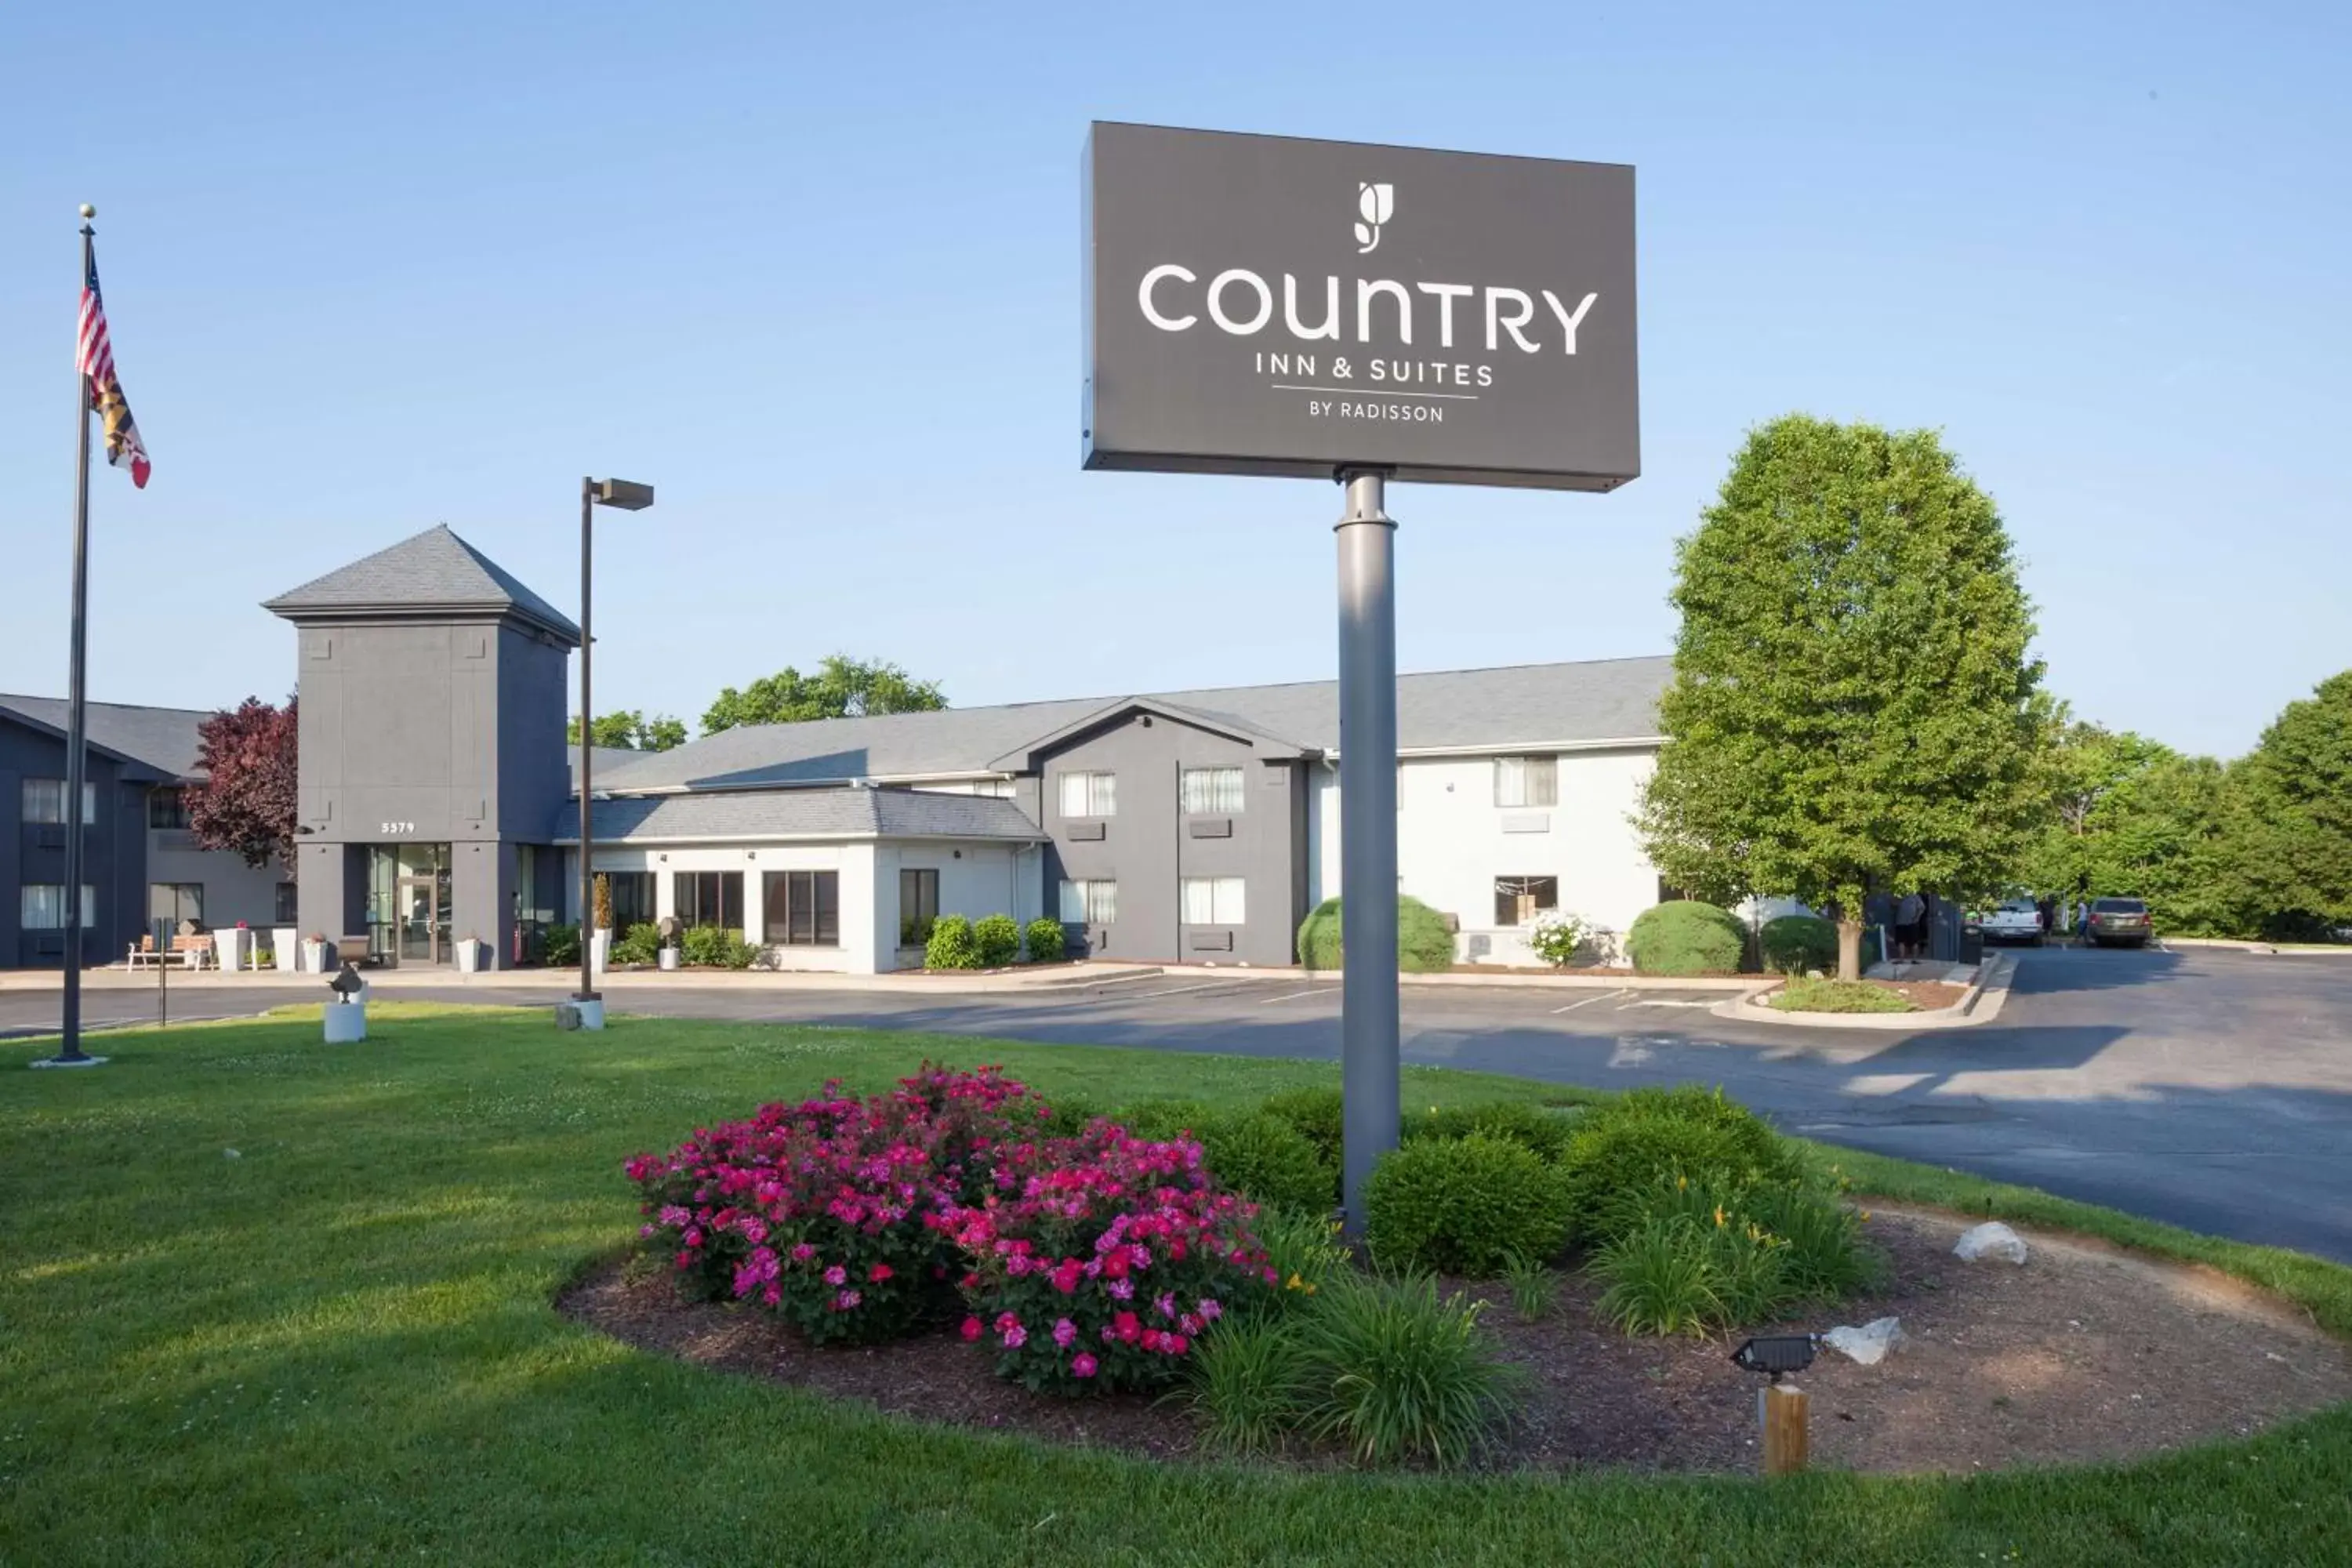 Property building in Country Inn & Suites by Radisson, Frederick, MD